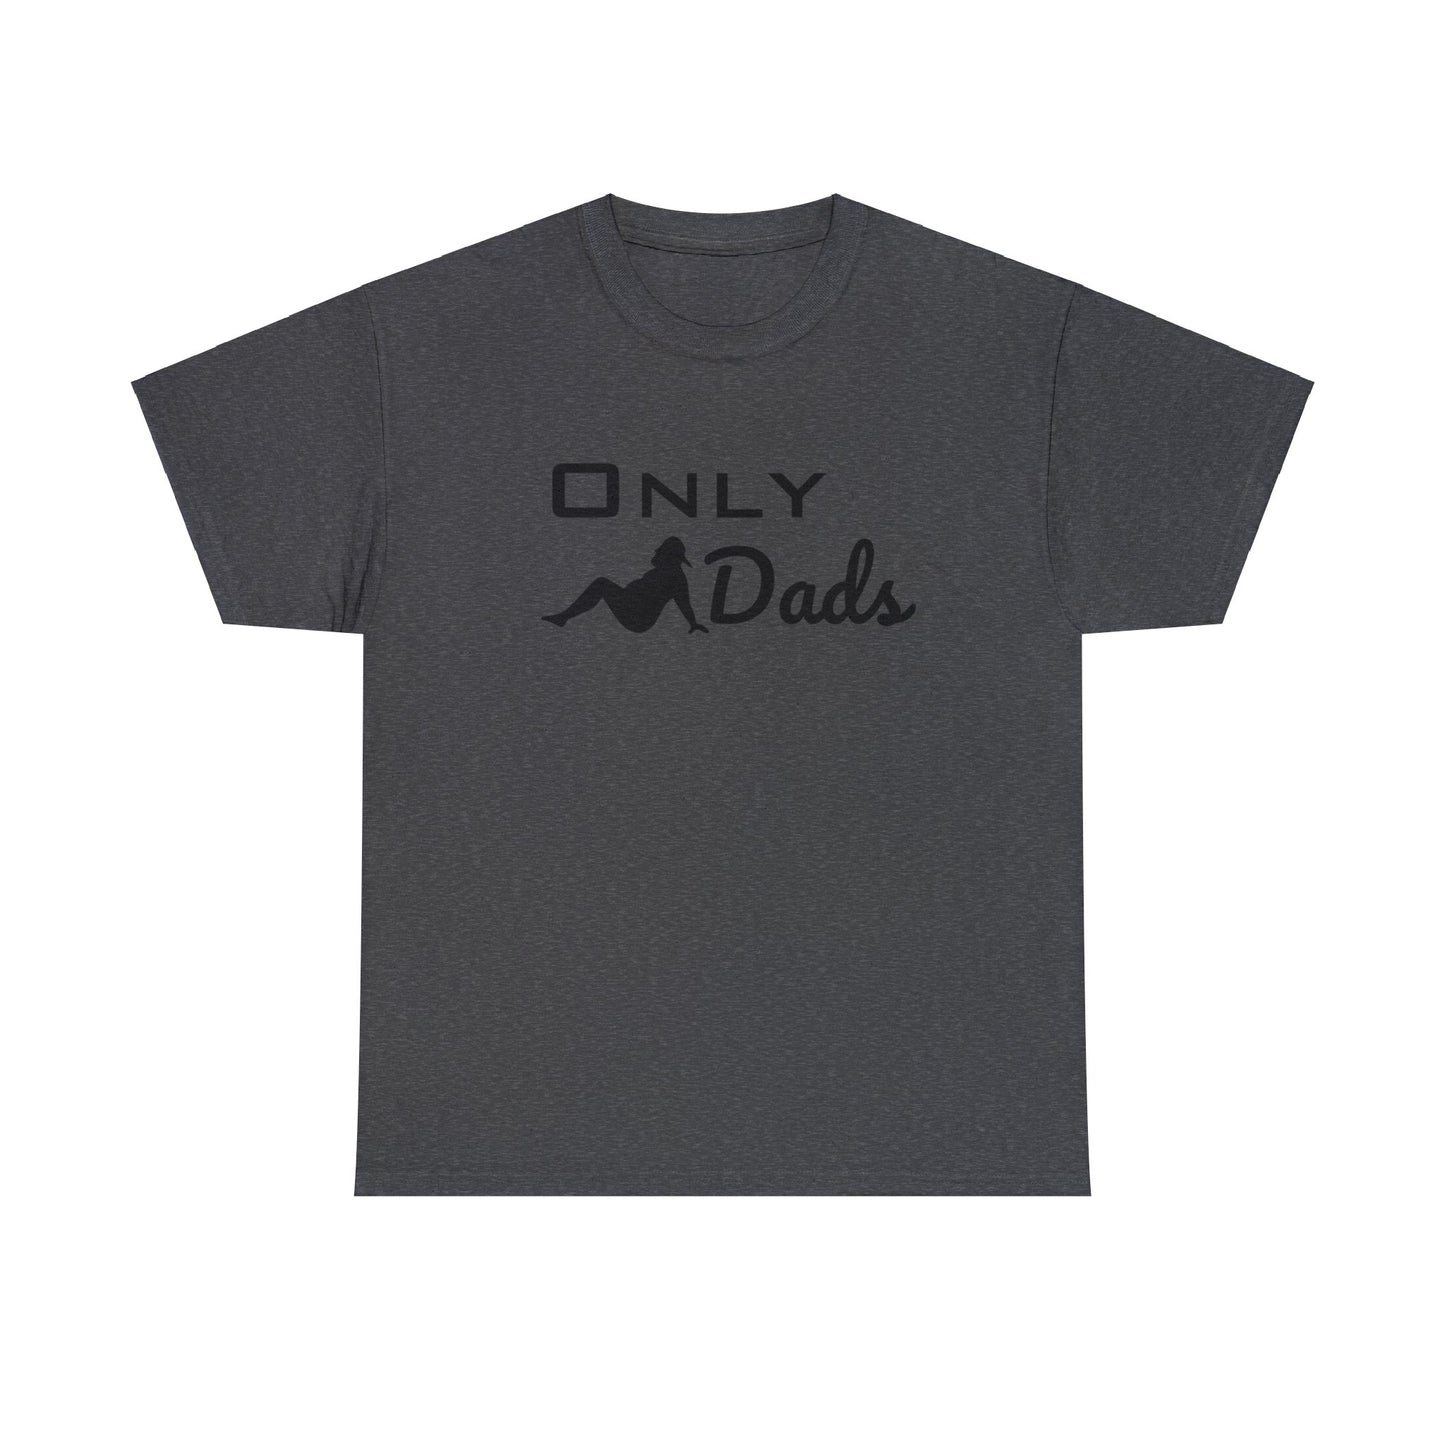 Comfortable and durable "Only Dads" cotton tee with sharp print quality.